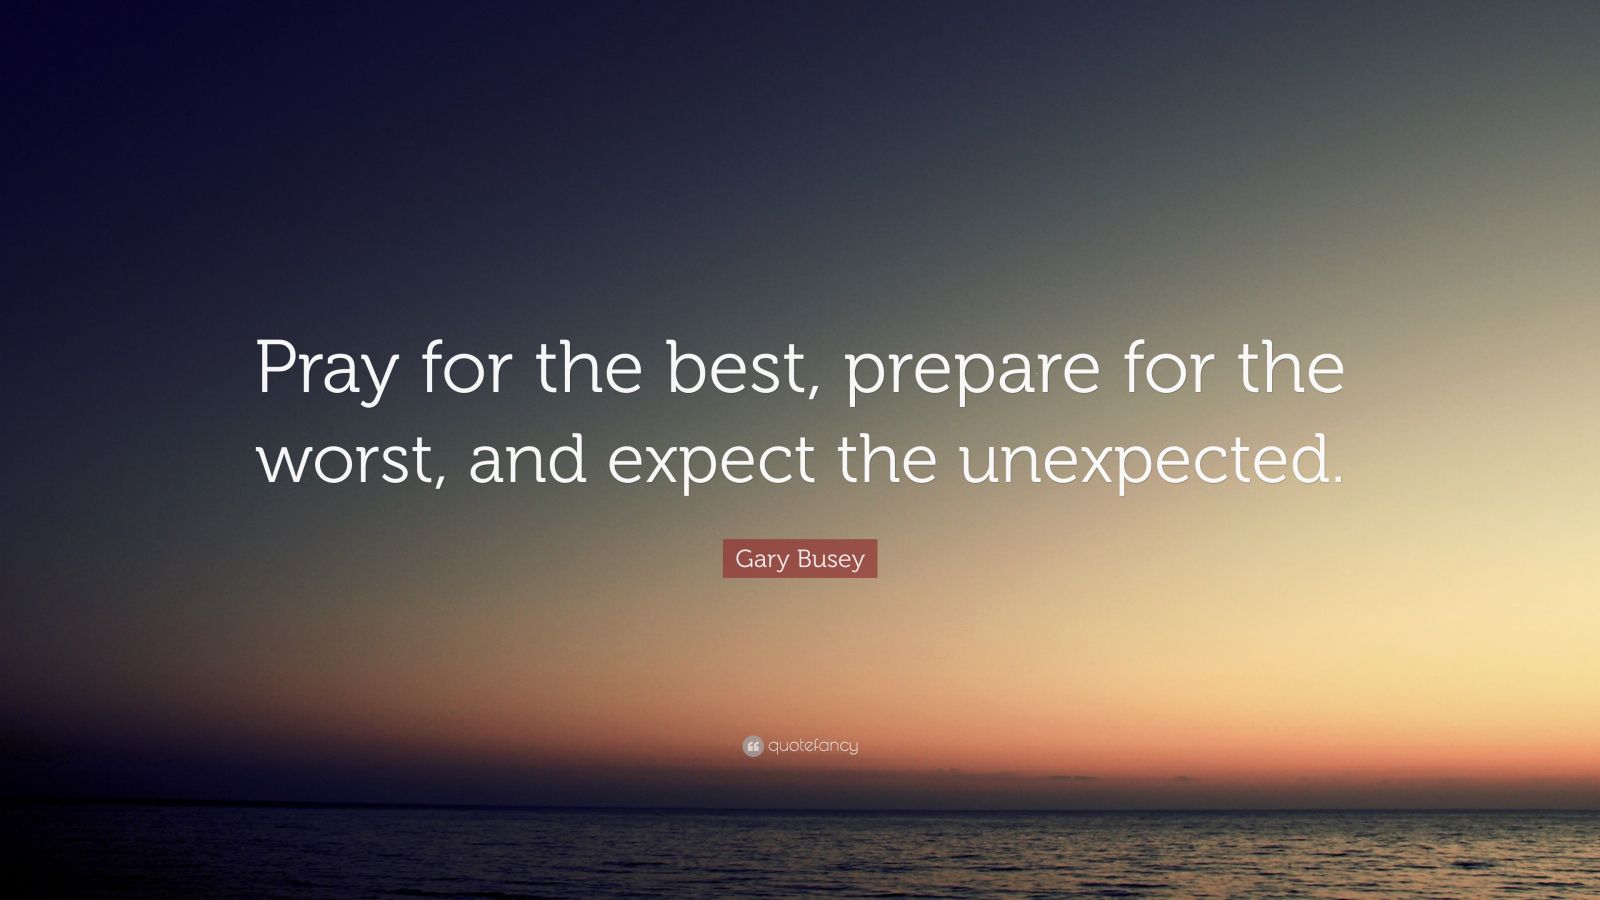 Gary Busey Quote: “Pray for the best, prepare for the worst, and expect